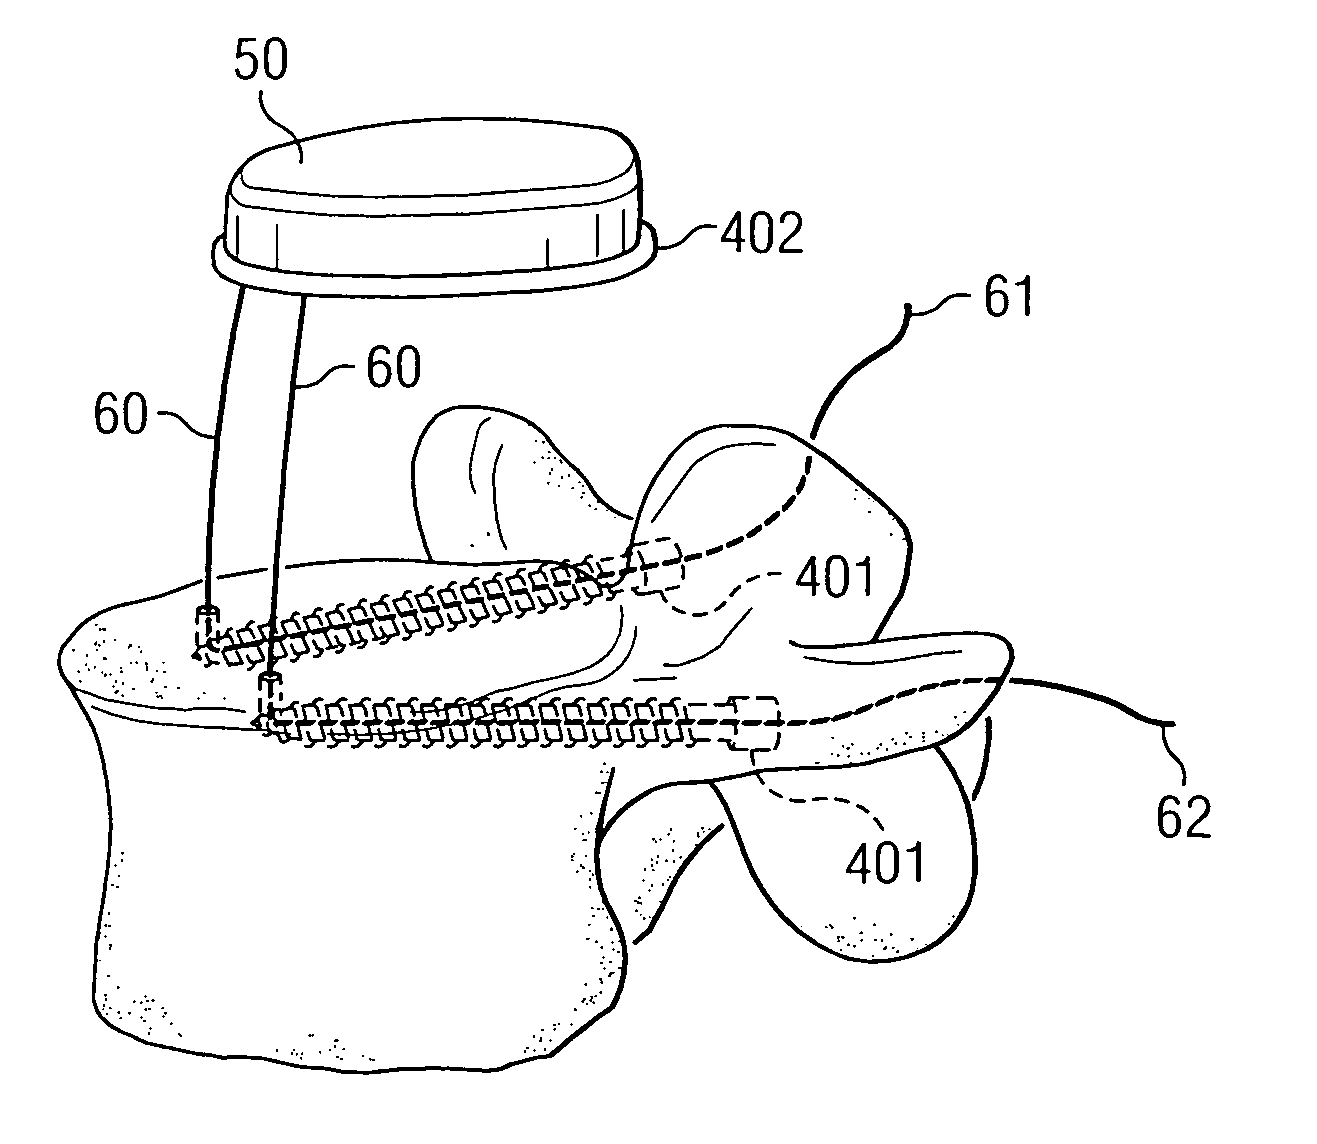 Nucleus replacement securing device and method